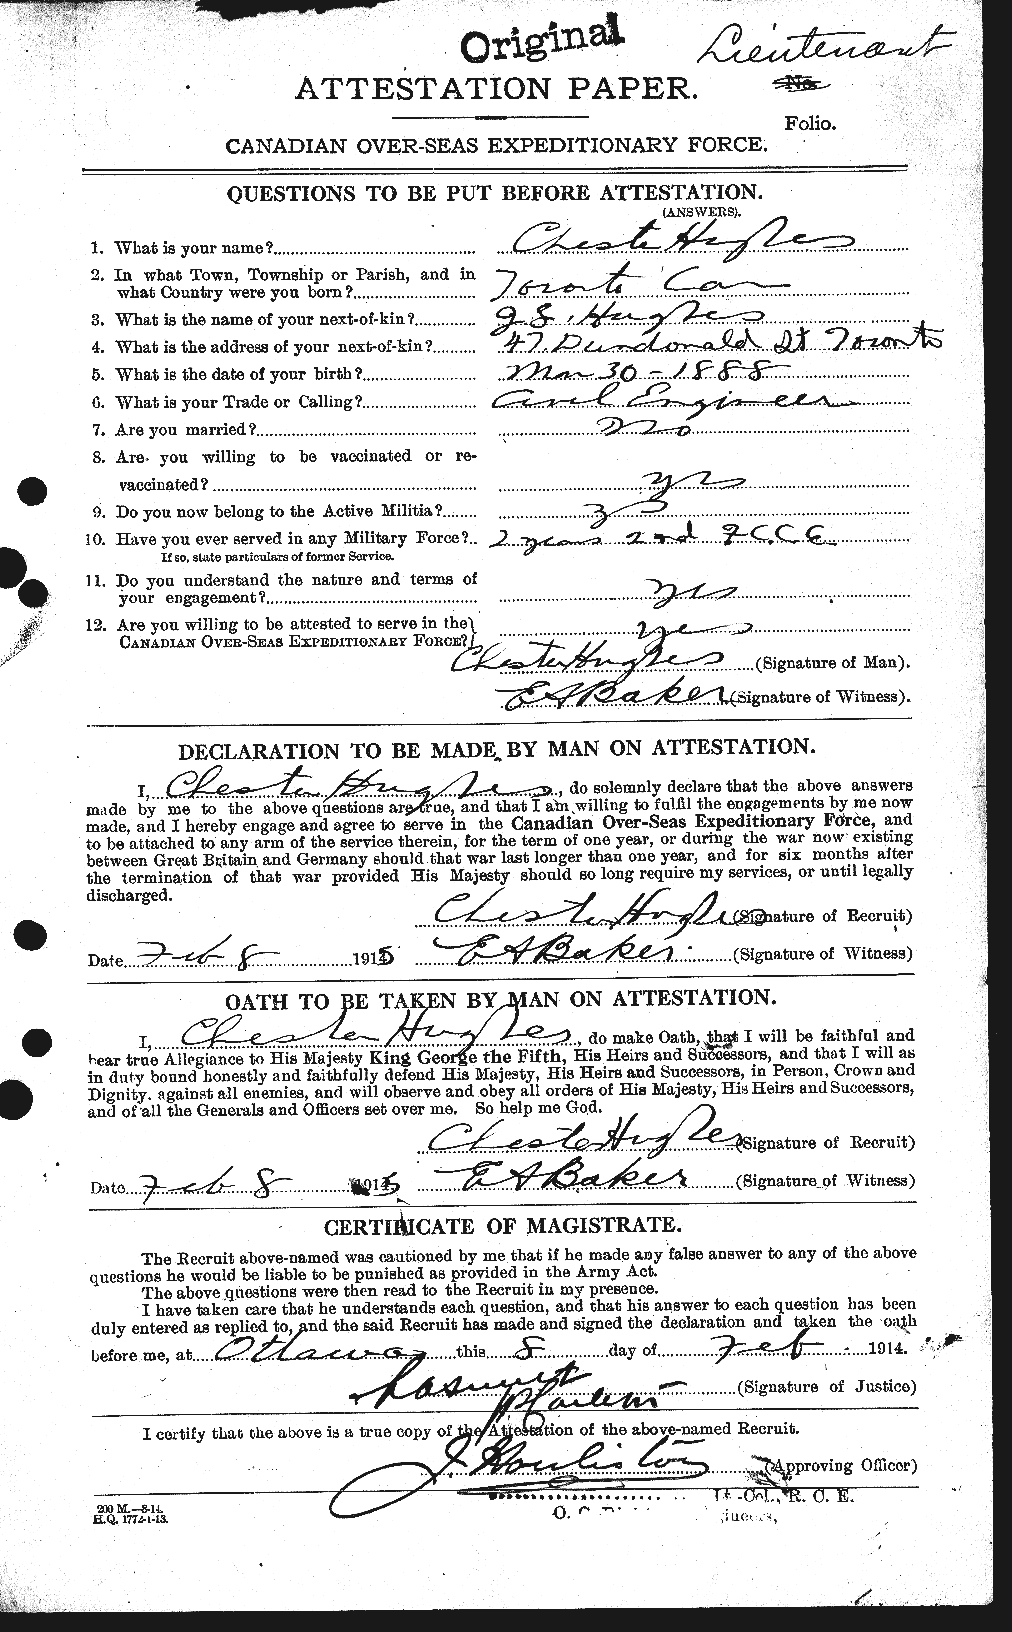 Personnel Records of the First World War - CEF 402621a